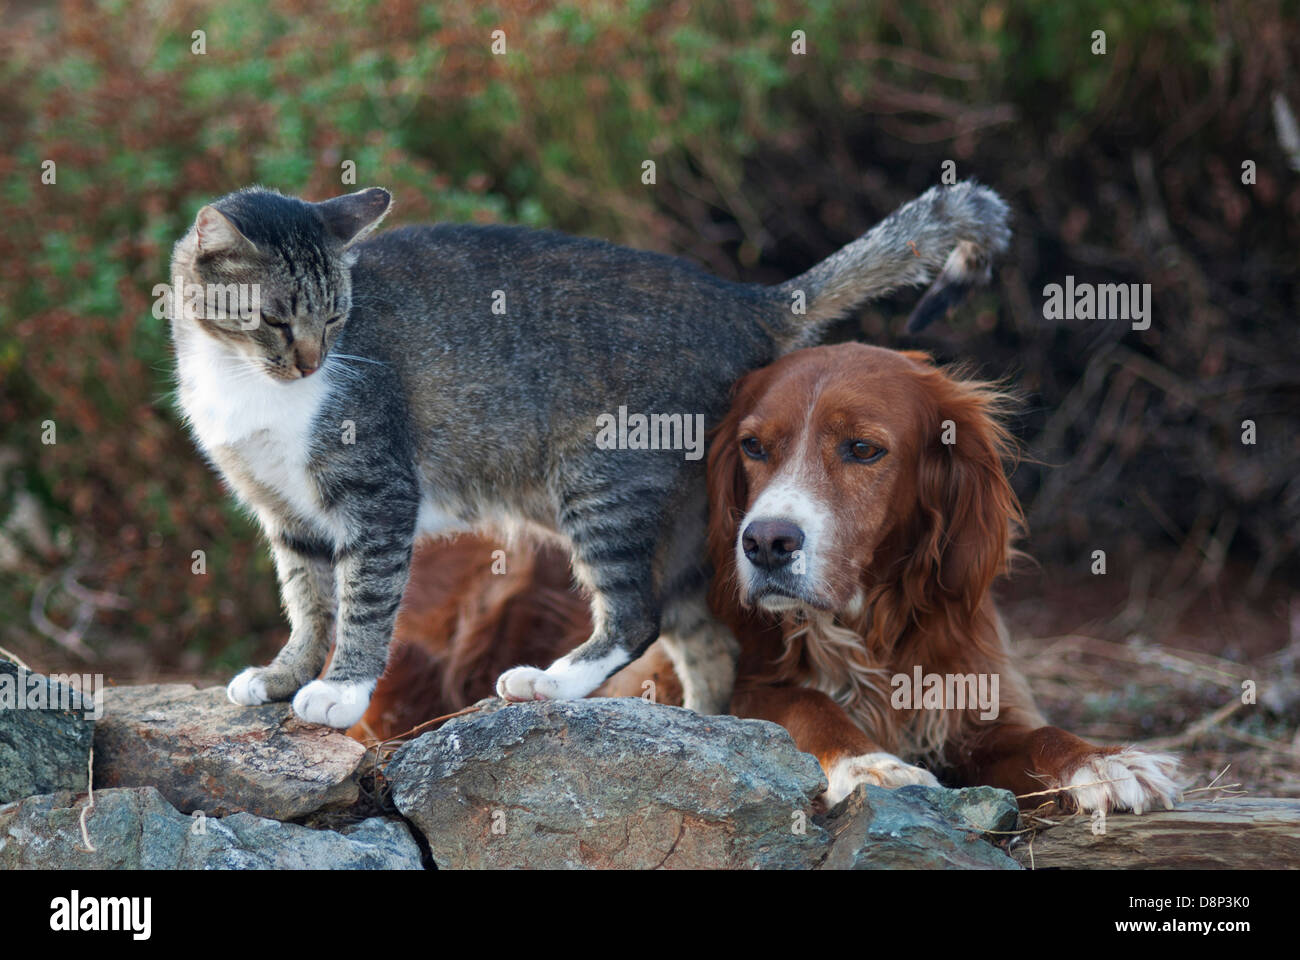 Cat and dog side by side Stock Photo